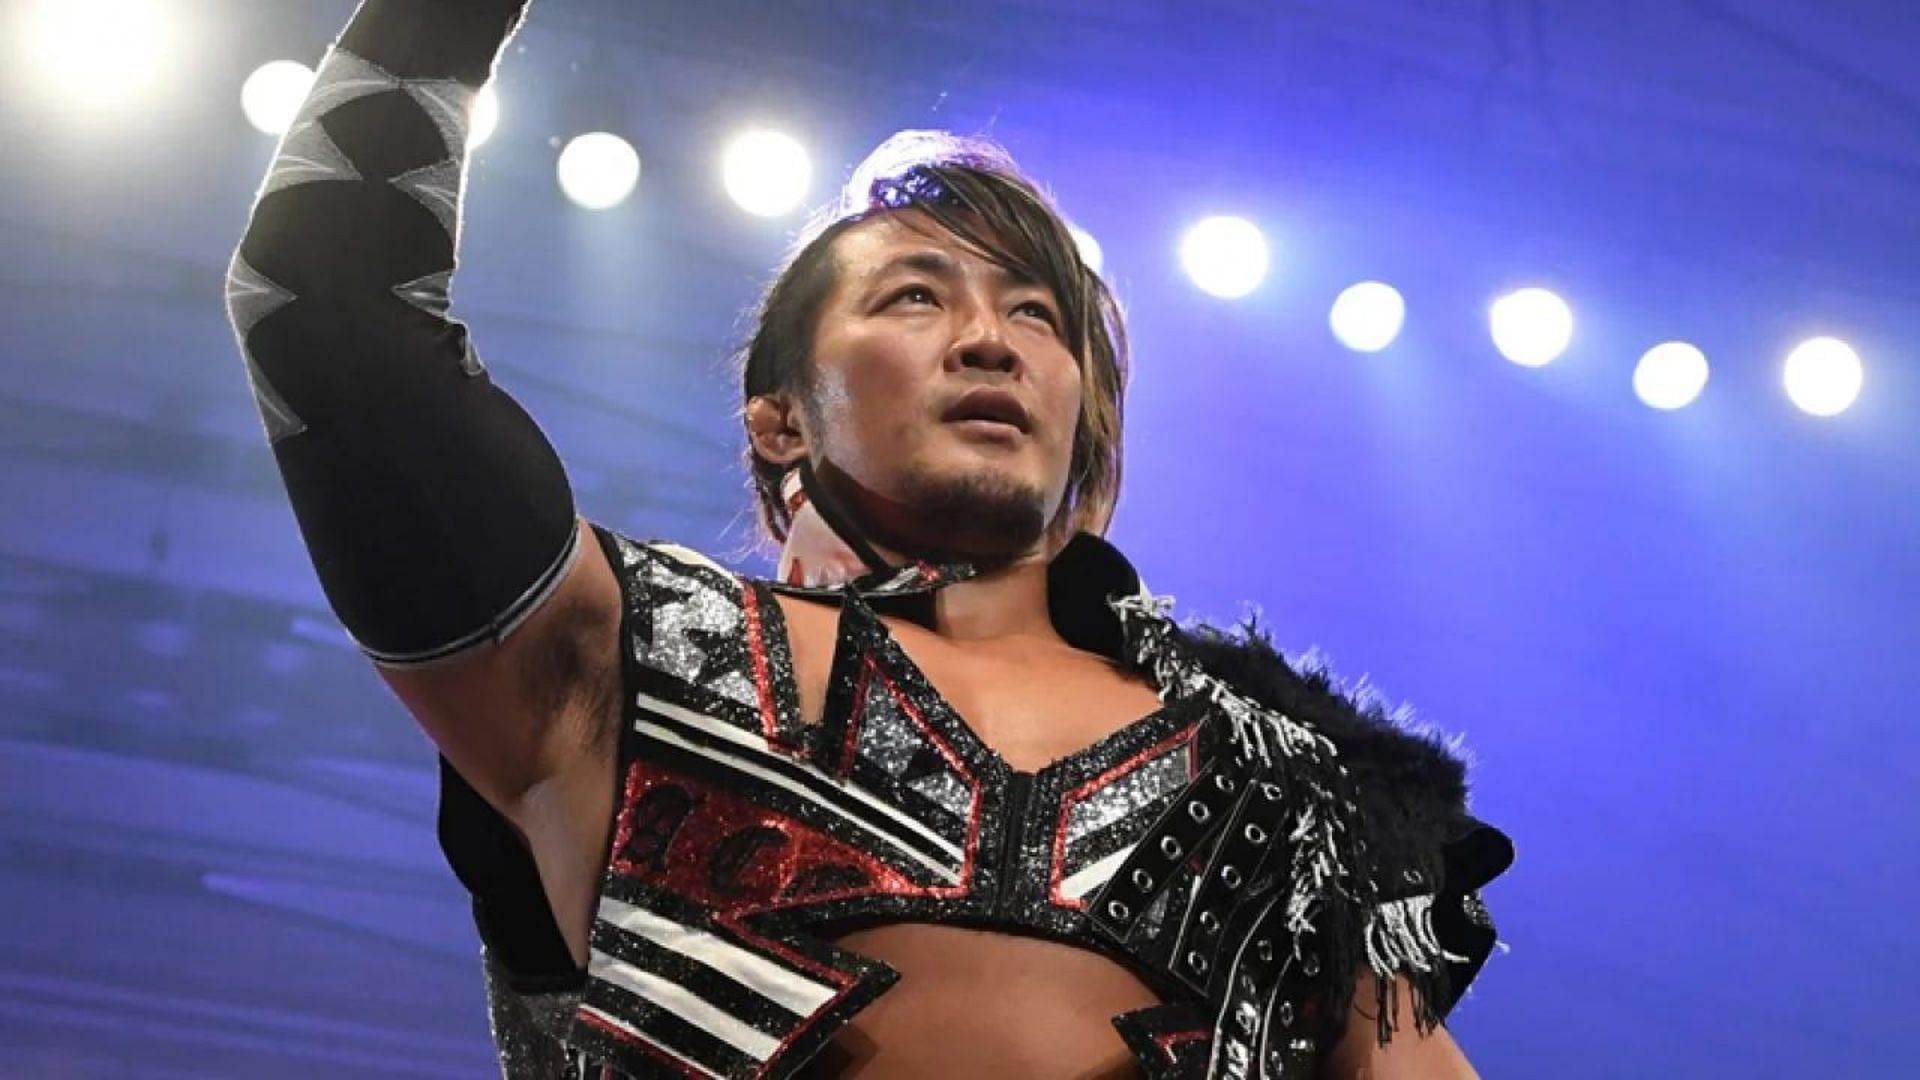 The Ace has landed a historic role in NJPW